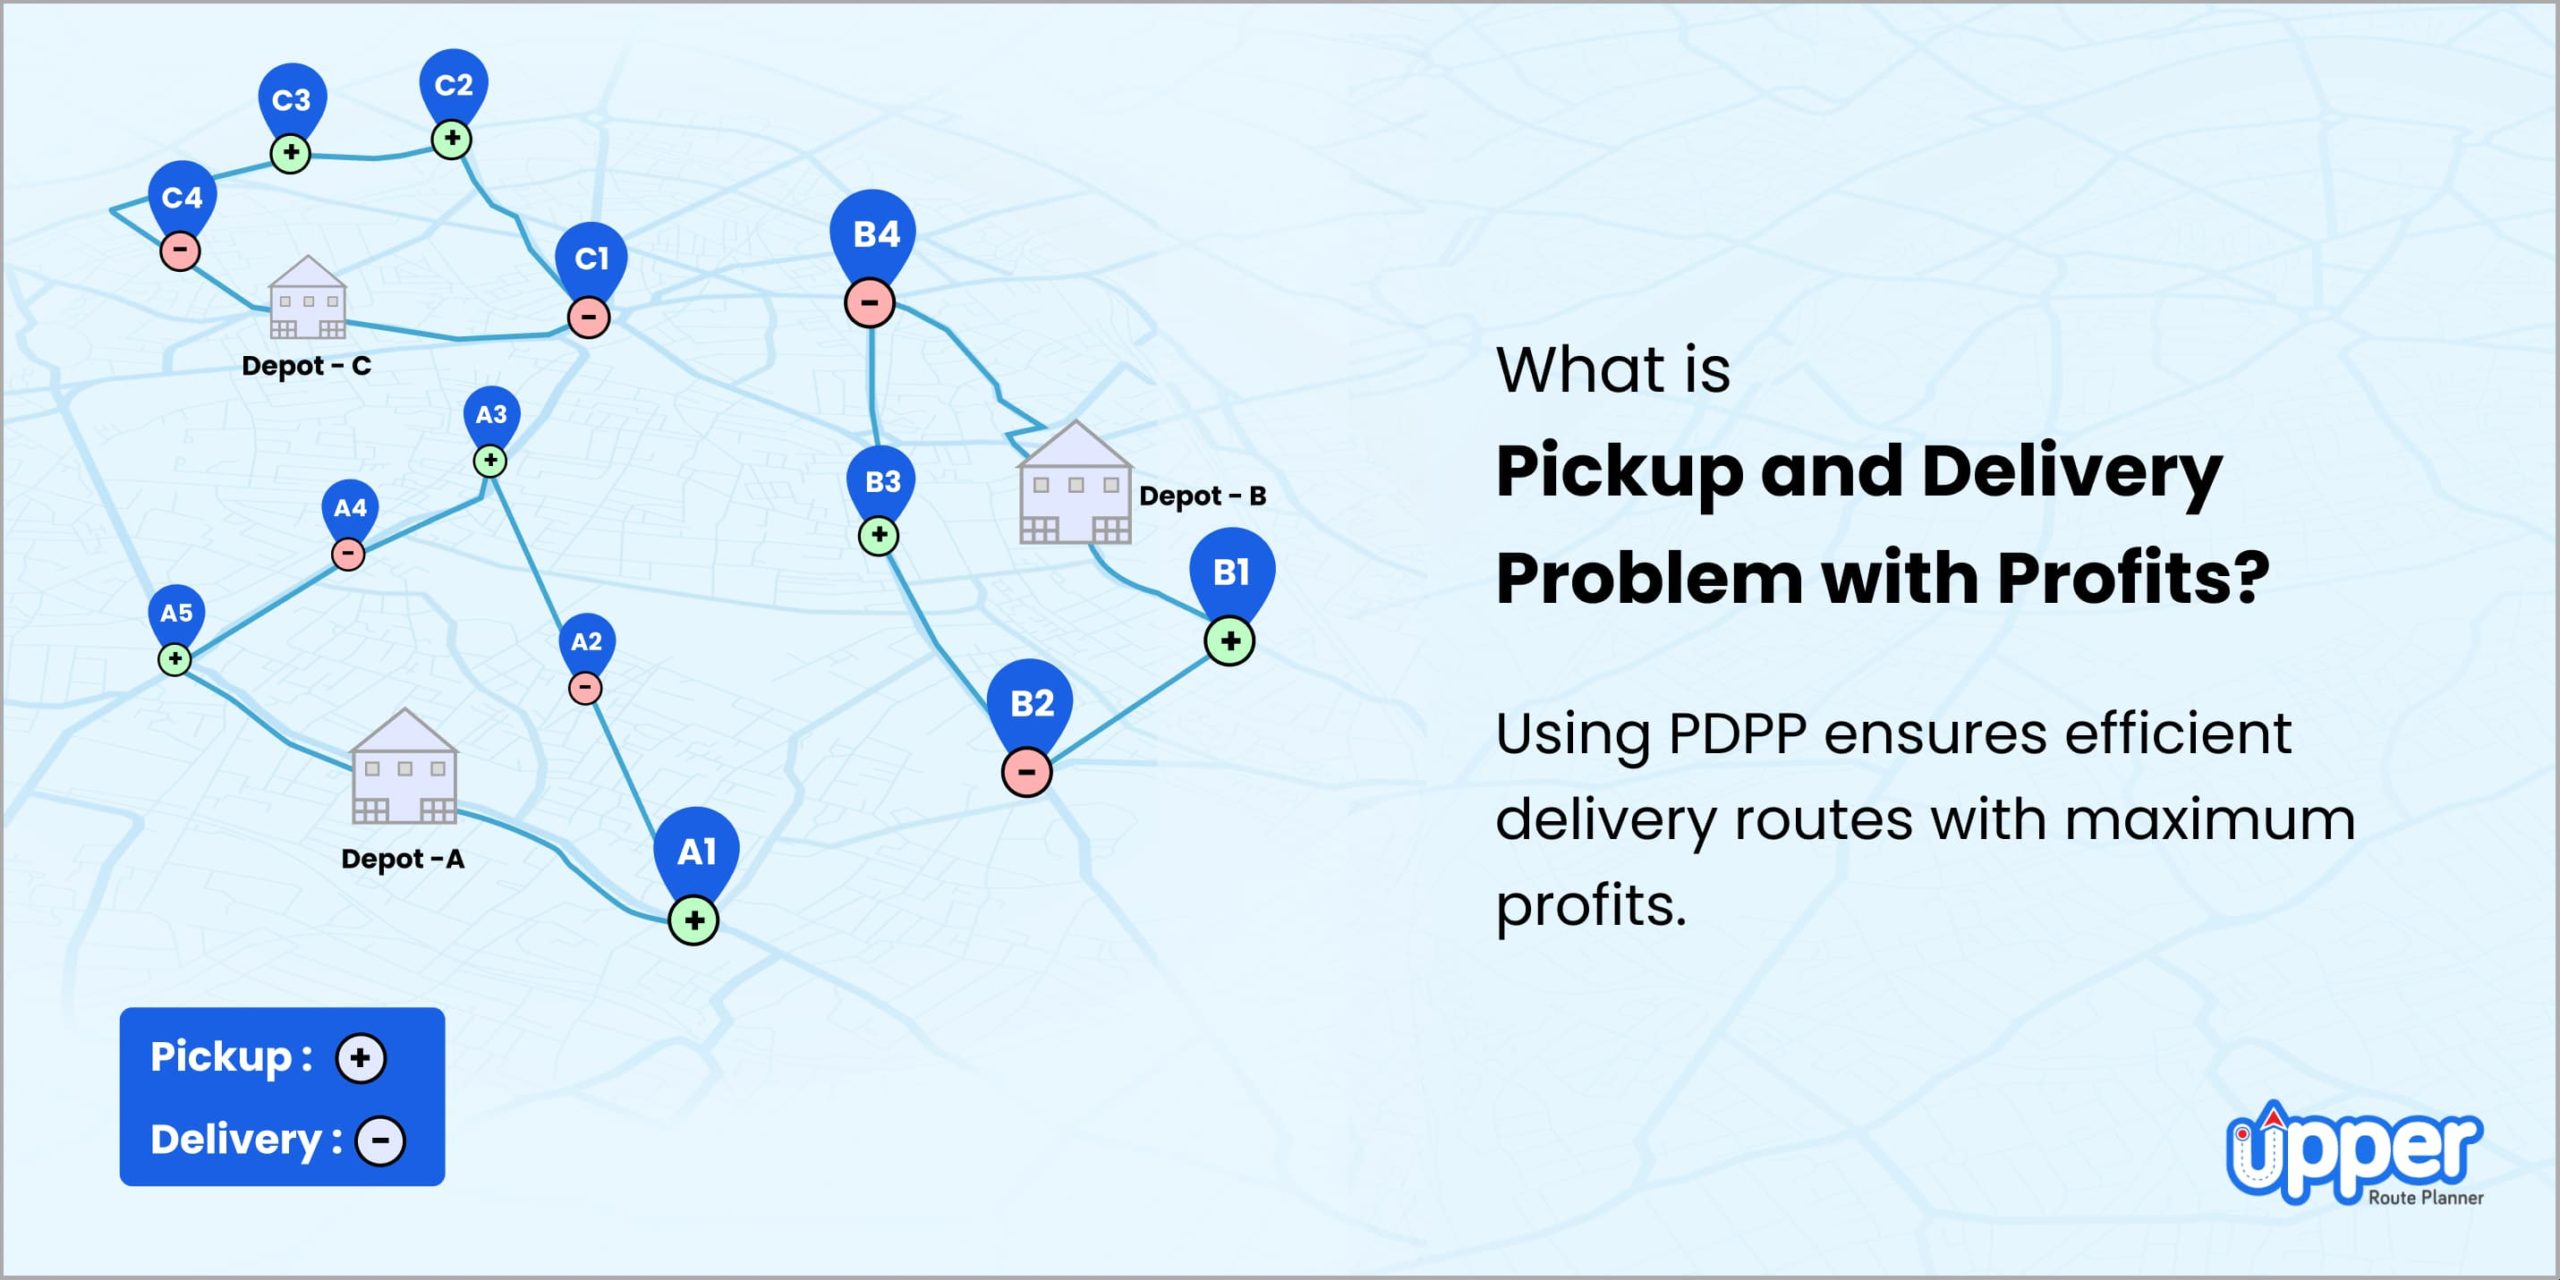 What is pickup and delivery problem with profits